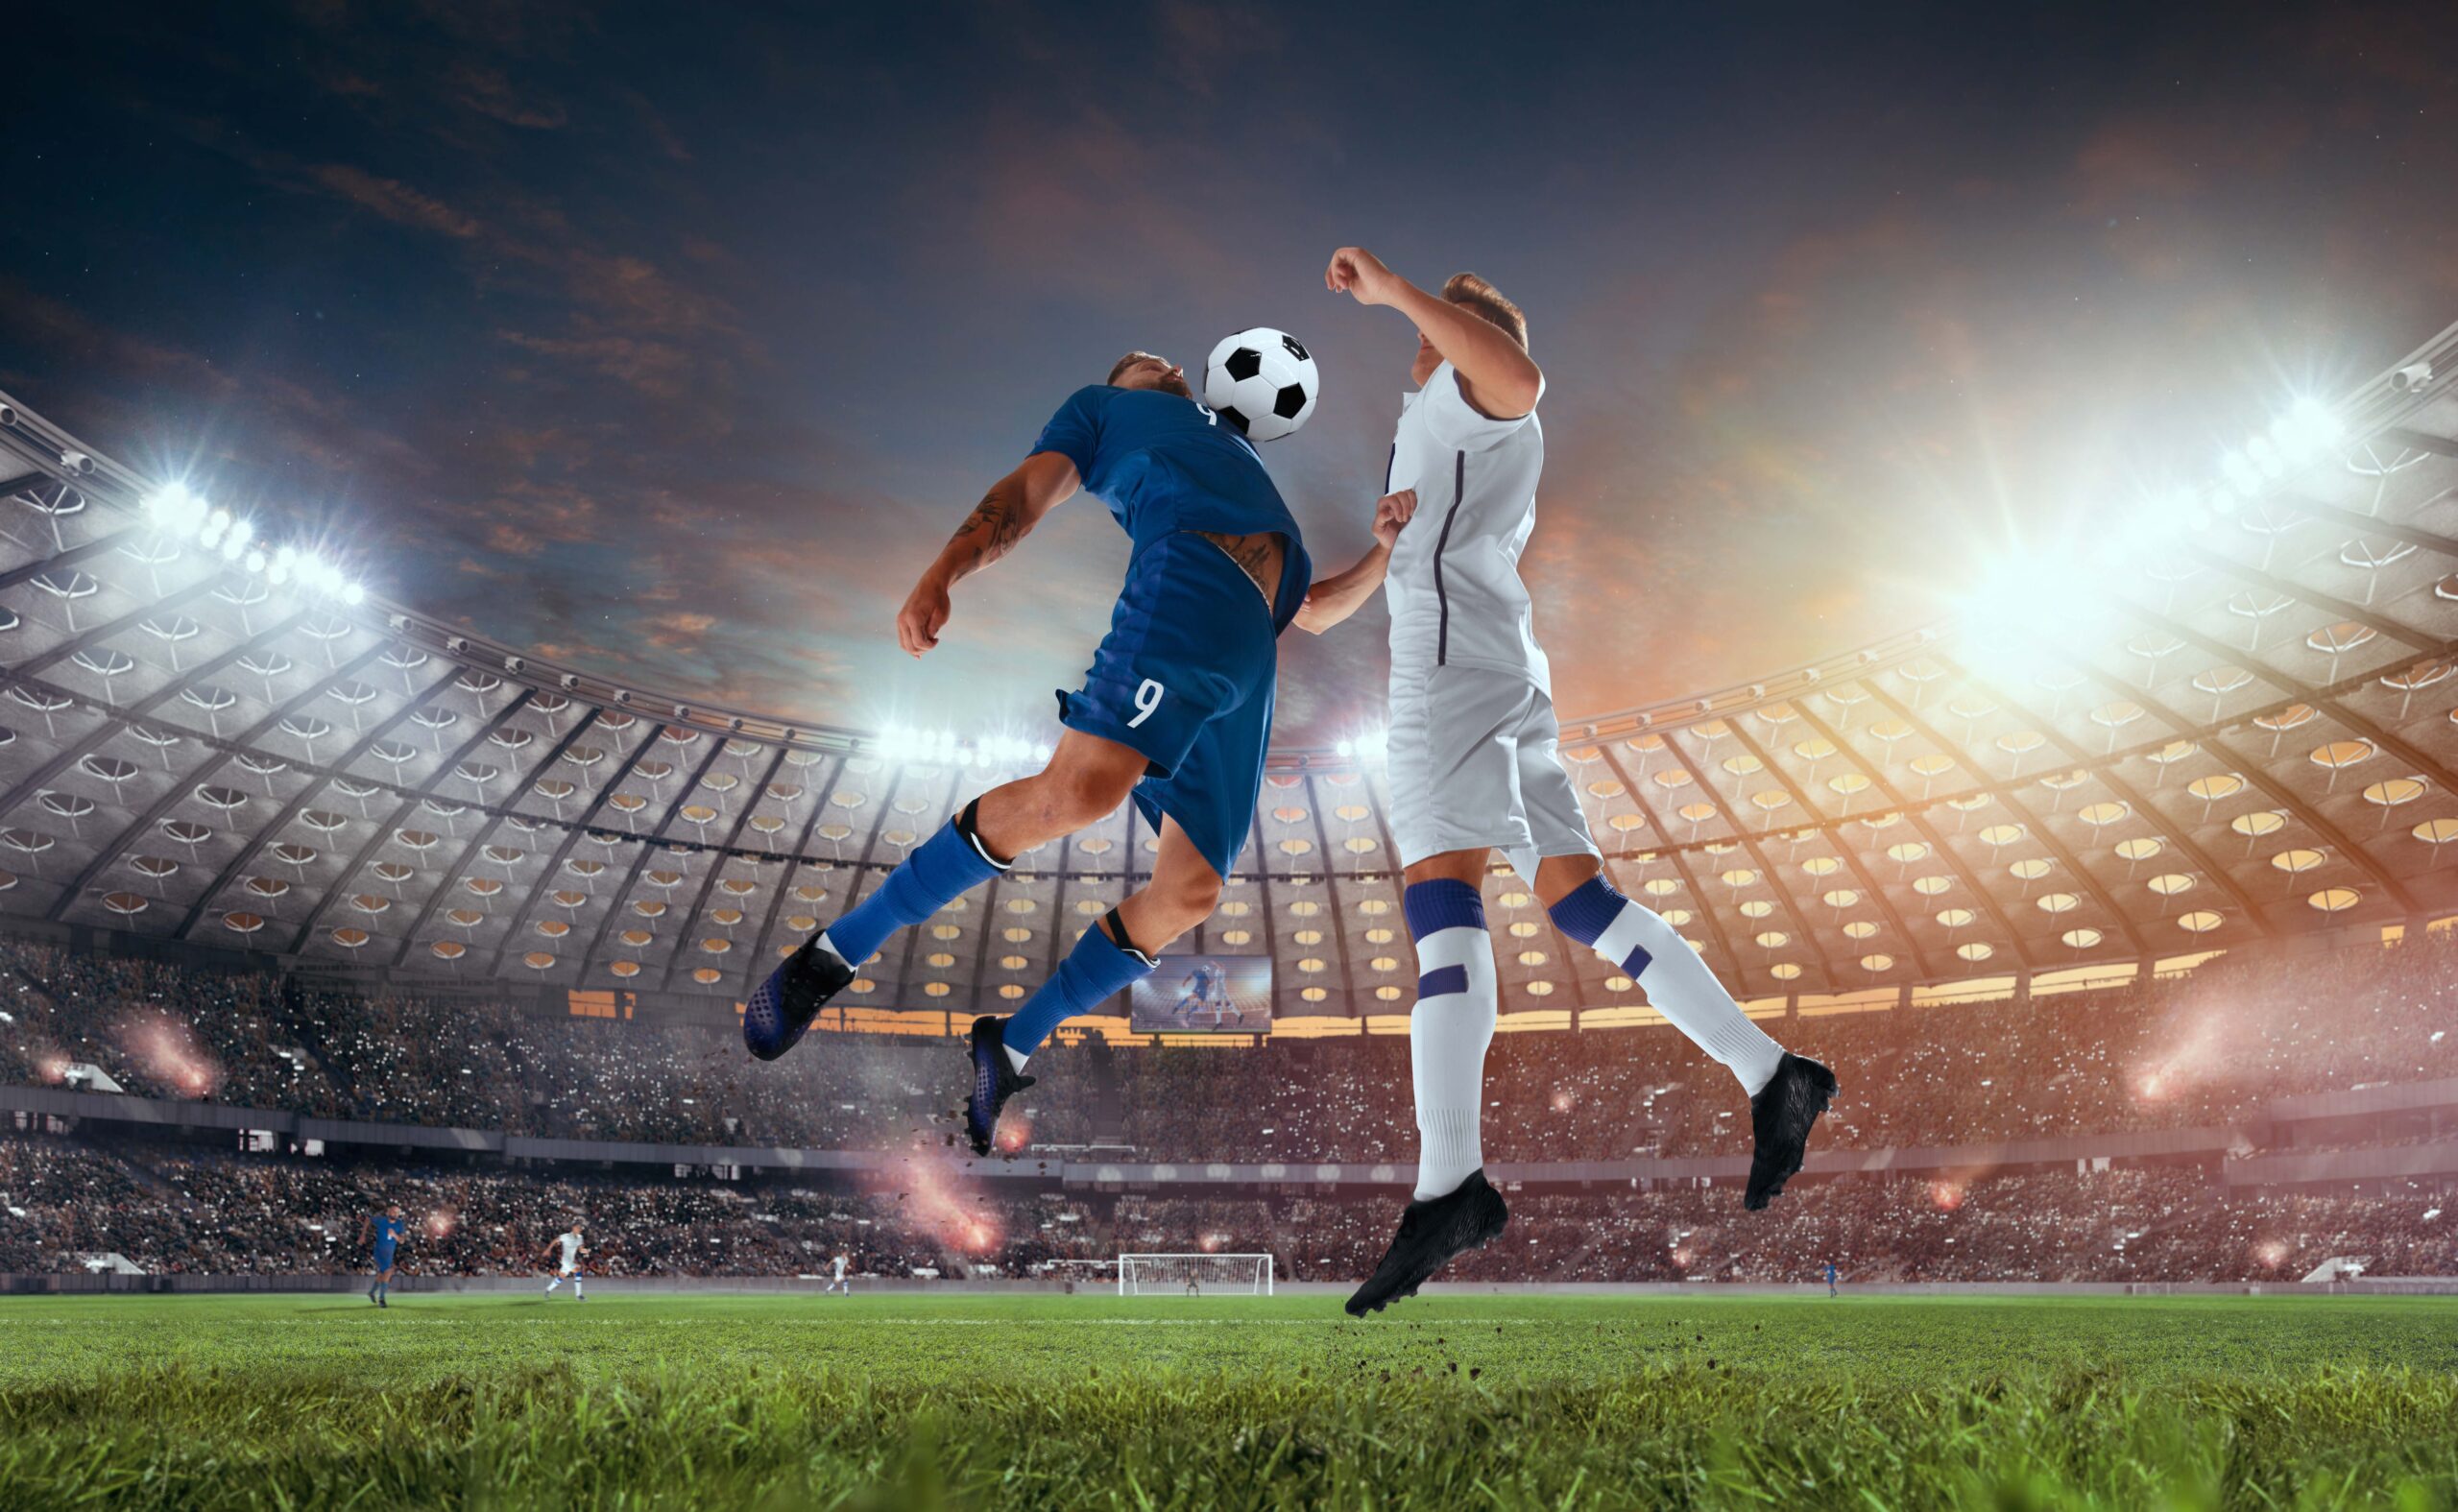 Calling All UAE Fantasy Sports Fans: Tech Trends That Will Level Up Your Game!